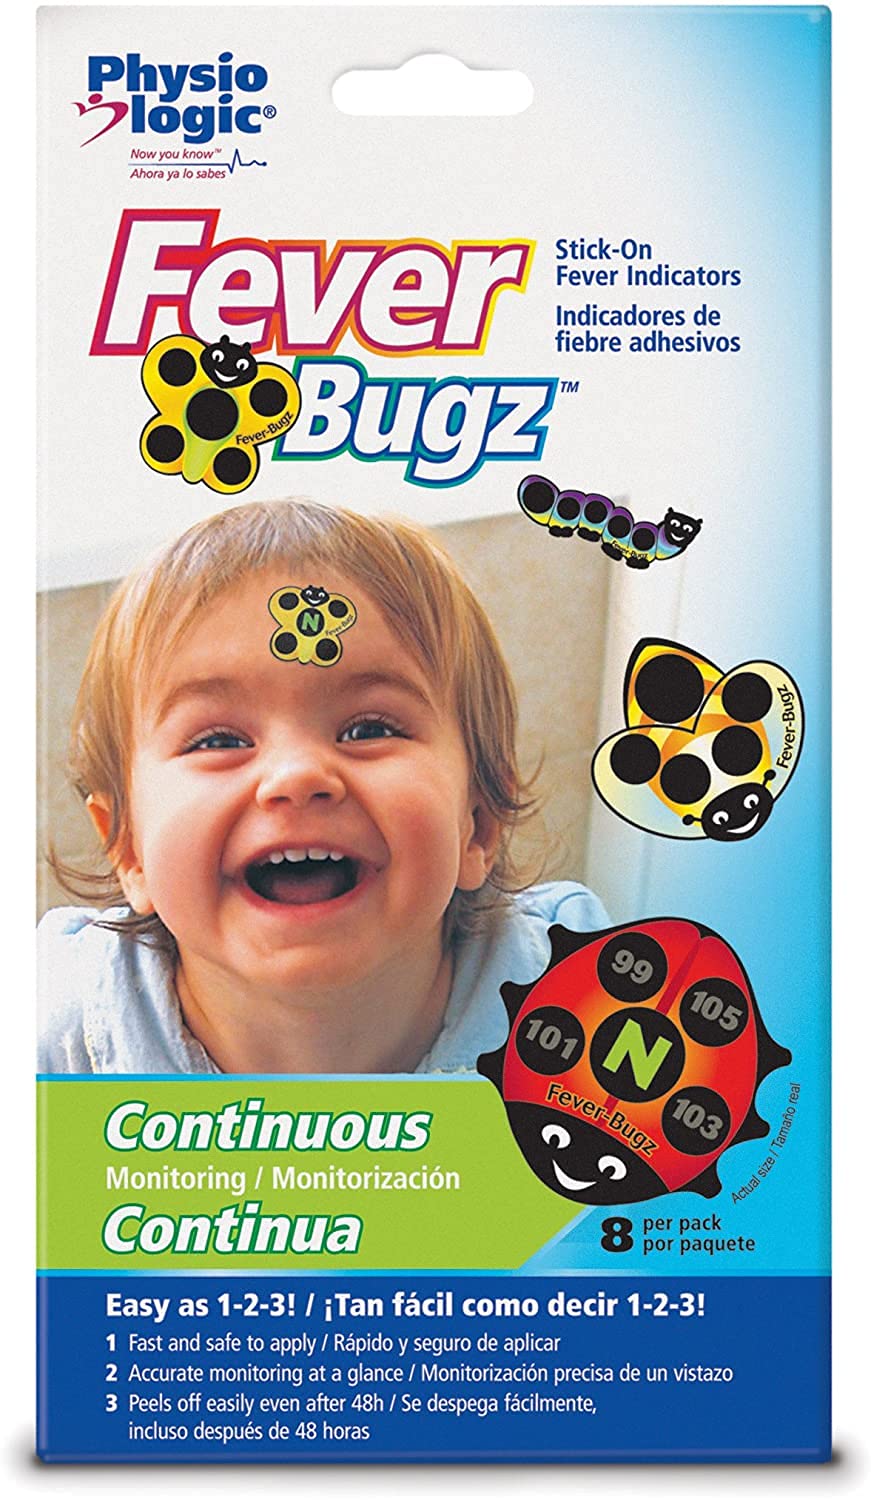 Physio Logic Fever-Bugz Indicator, Allows to Continuously Monitor Fever or Temperature for Up to 48 Hours, Colorful Stick-on that is Safe, Accurate, and Fast